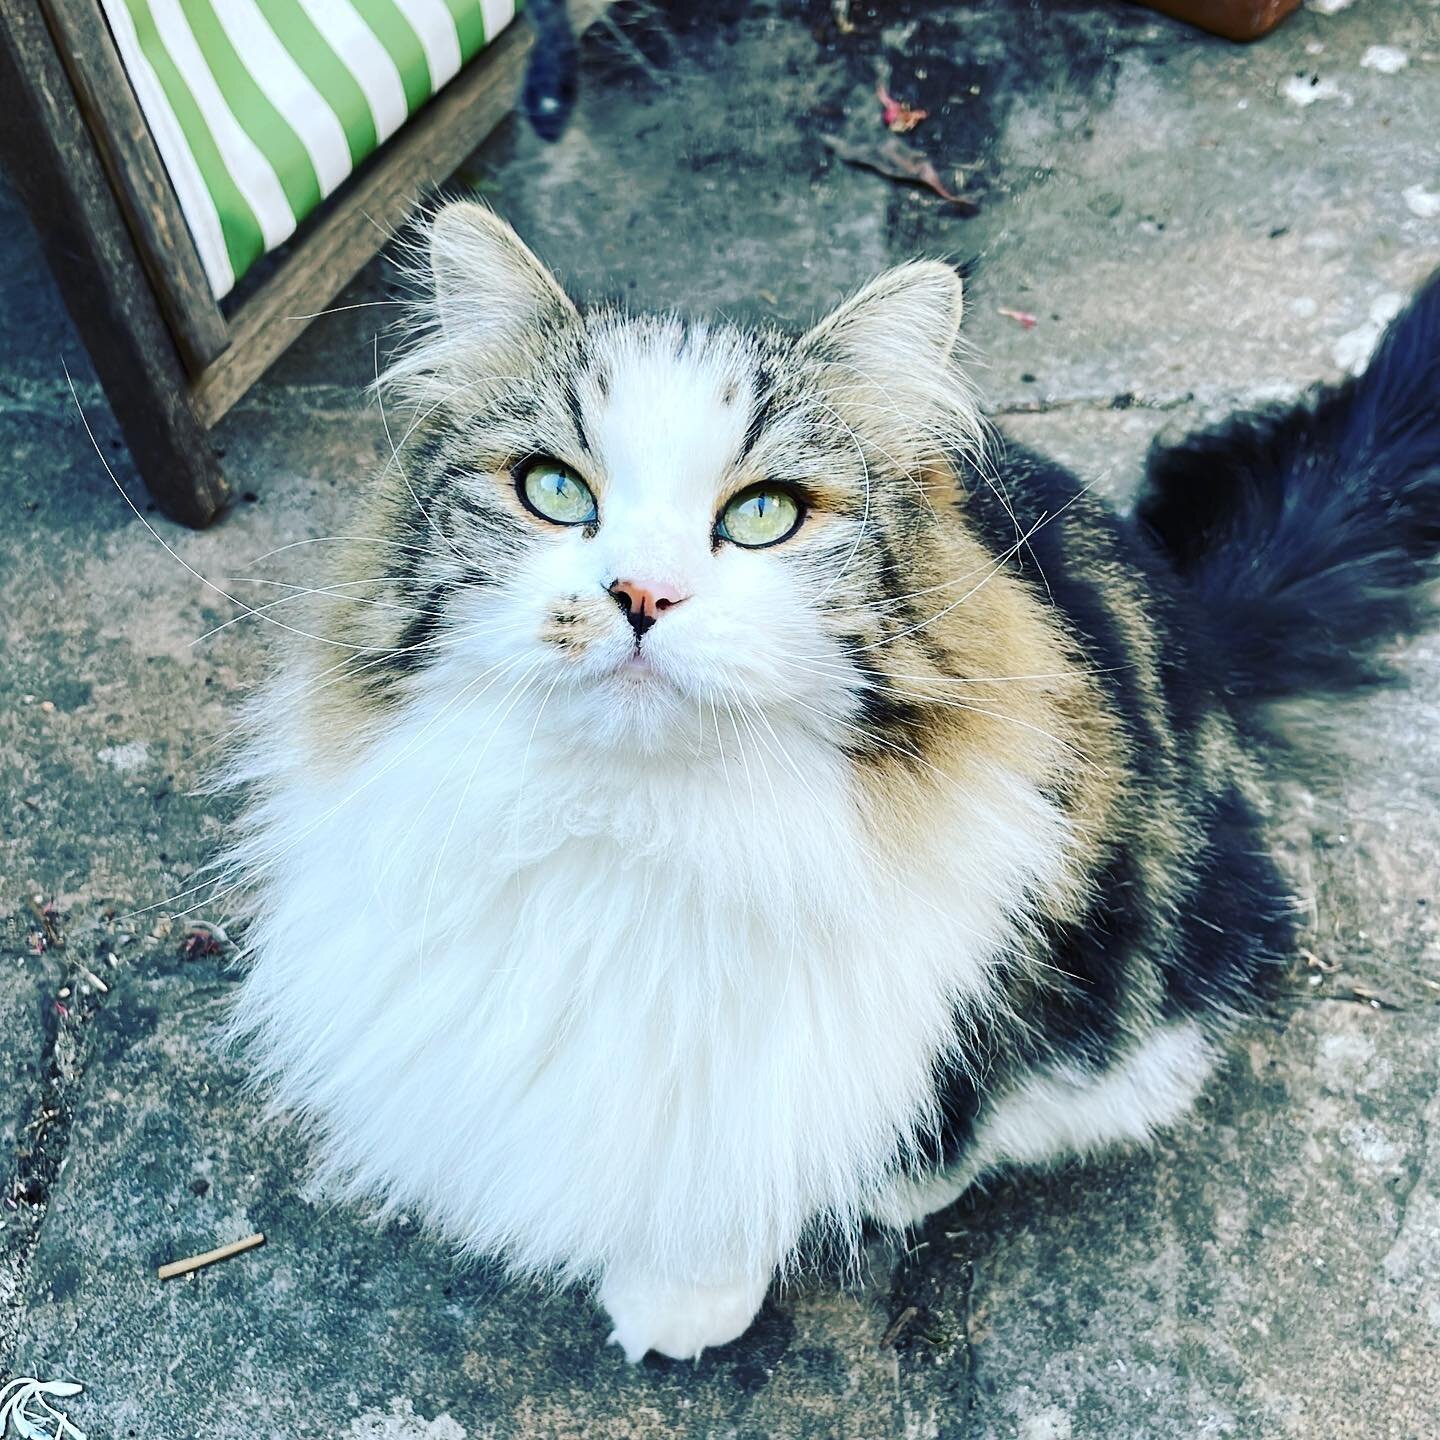 Mabel is such a pretty kitty 🥰🥰#londoncatsitter #catsitter #westlondonwhiskers #petservices #london #westlondoncatsitter #catsofinstagram #cats #gatto #instapet #catlovers